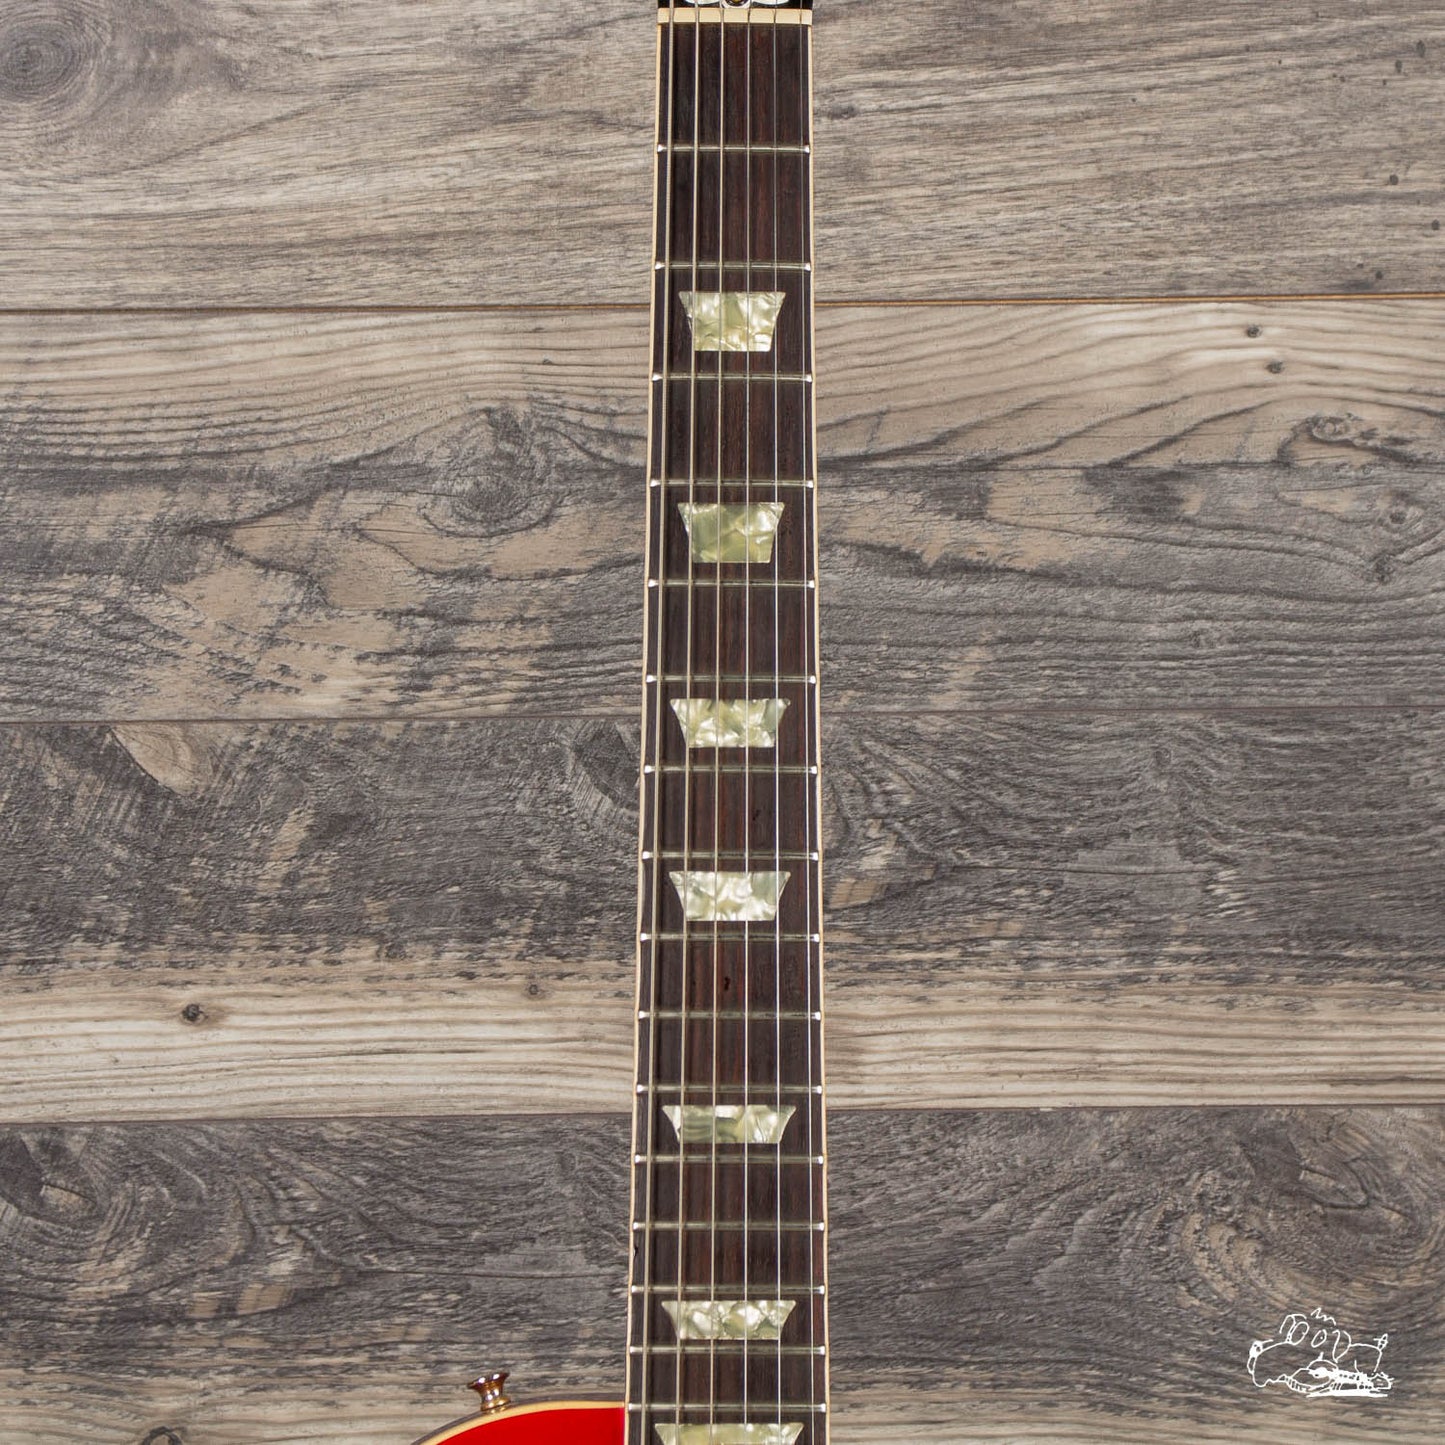 1989 Gibson Les Paul - Candy Apple Red